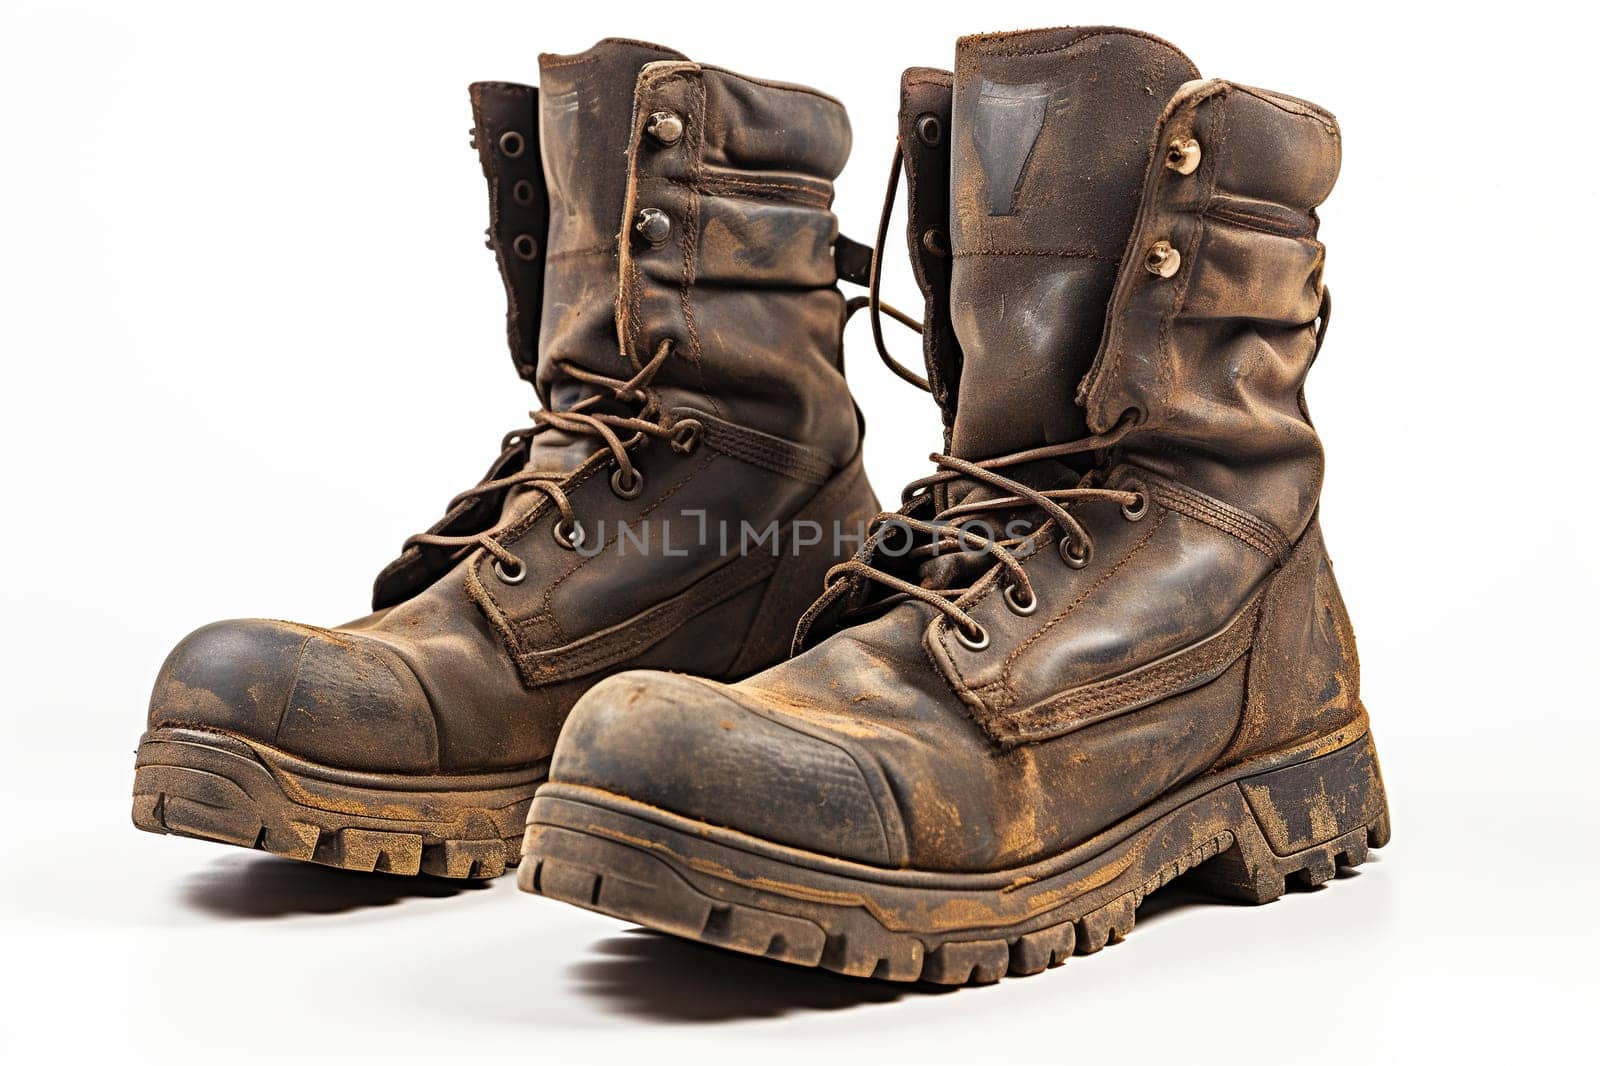 Old worn military boots on a white background. Generated by artificial intelligence by Vovmar